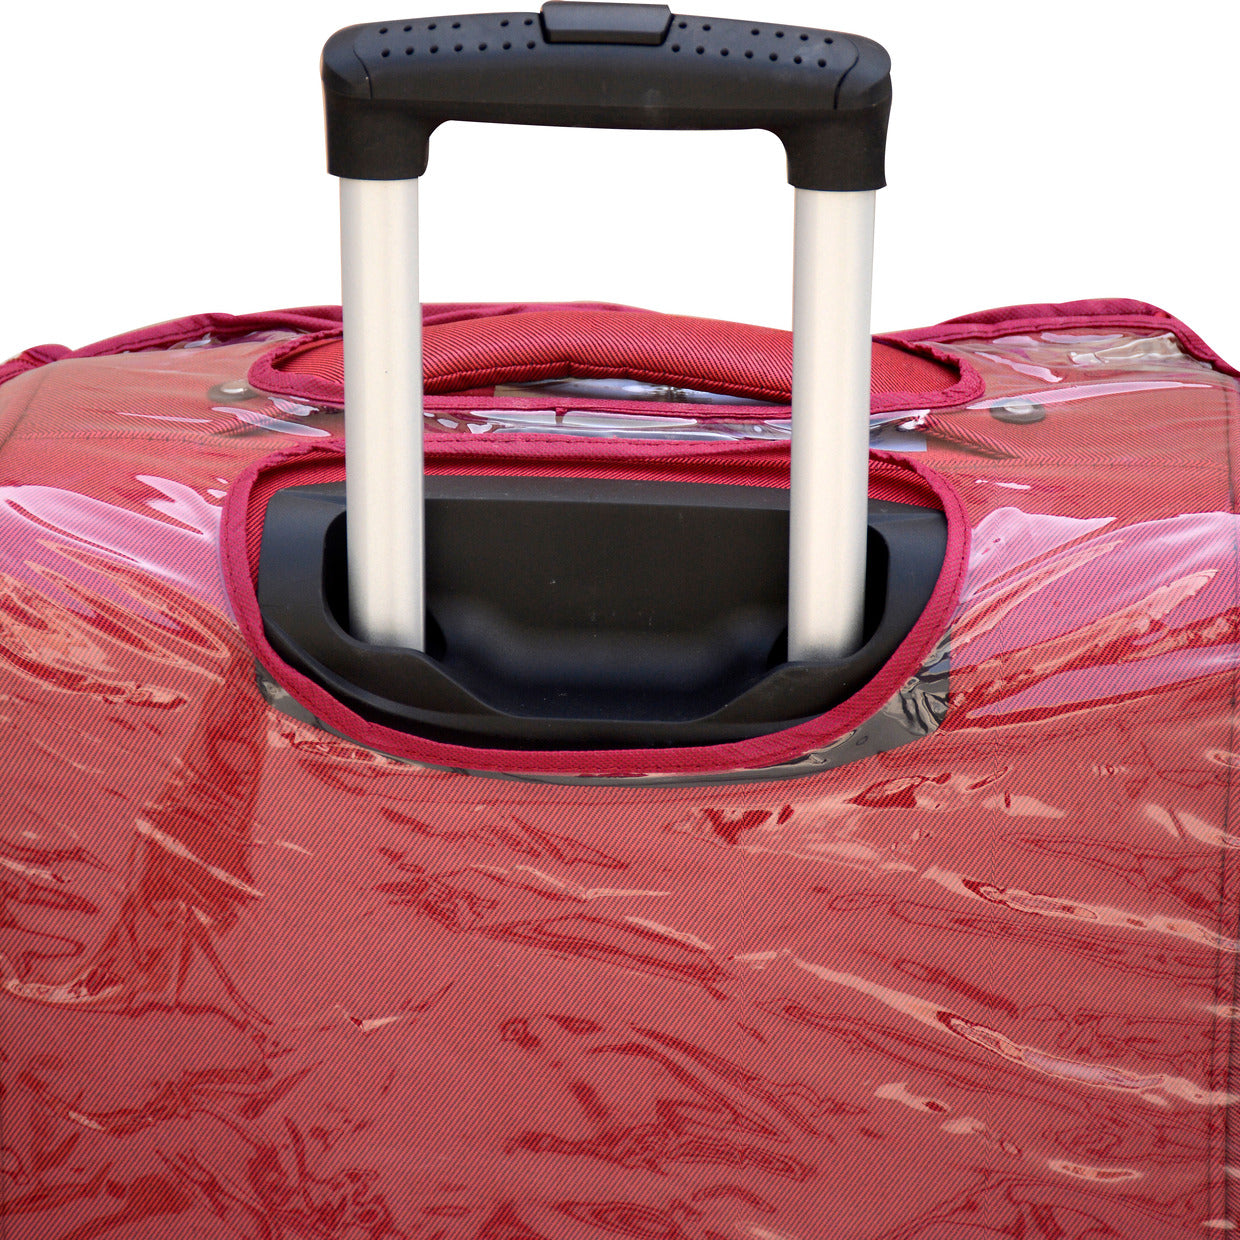 Red Color Premium Luggage With Full Set Cover | Premium Red Luggage With Cover C1 - PMLGSM4WBL